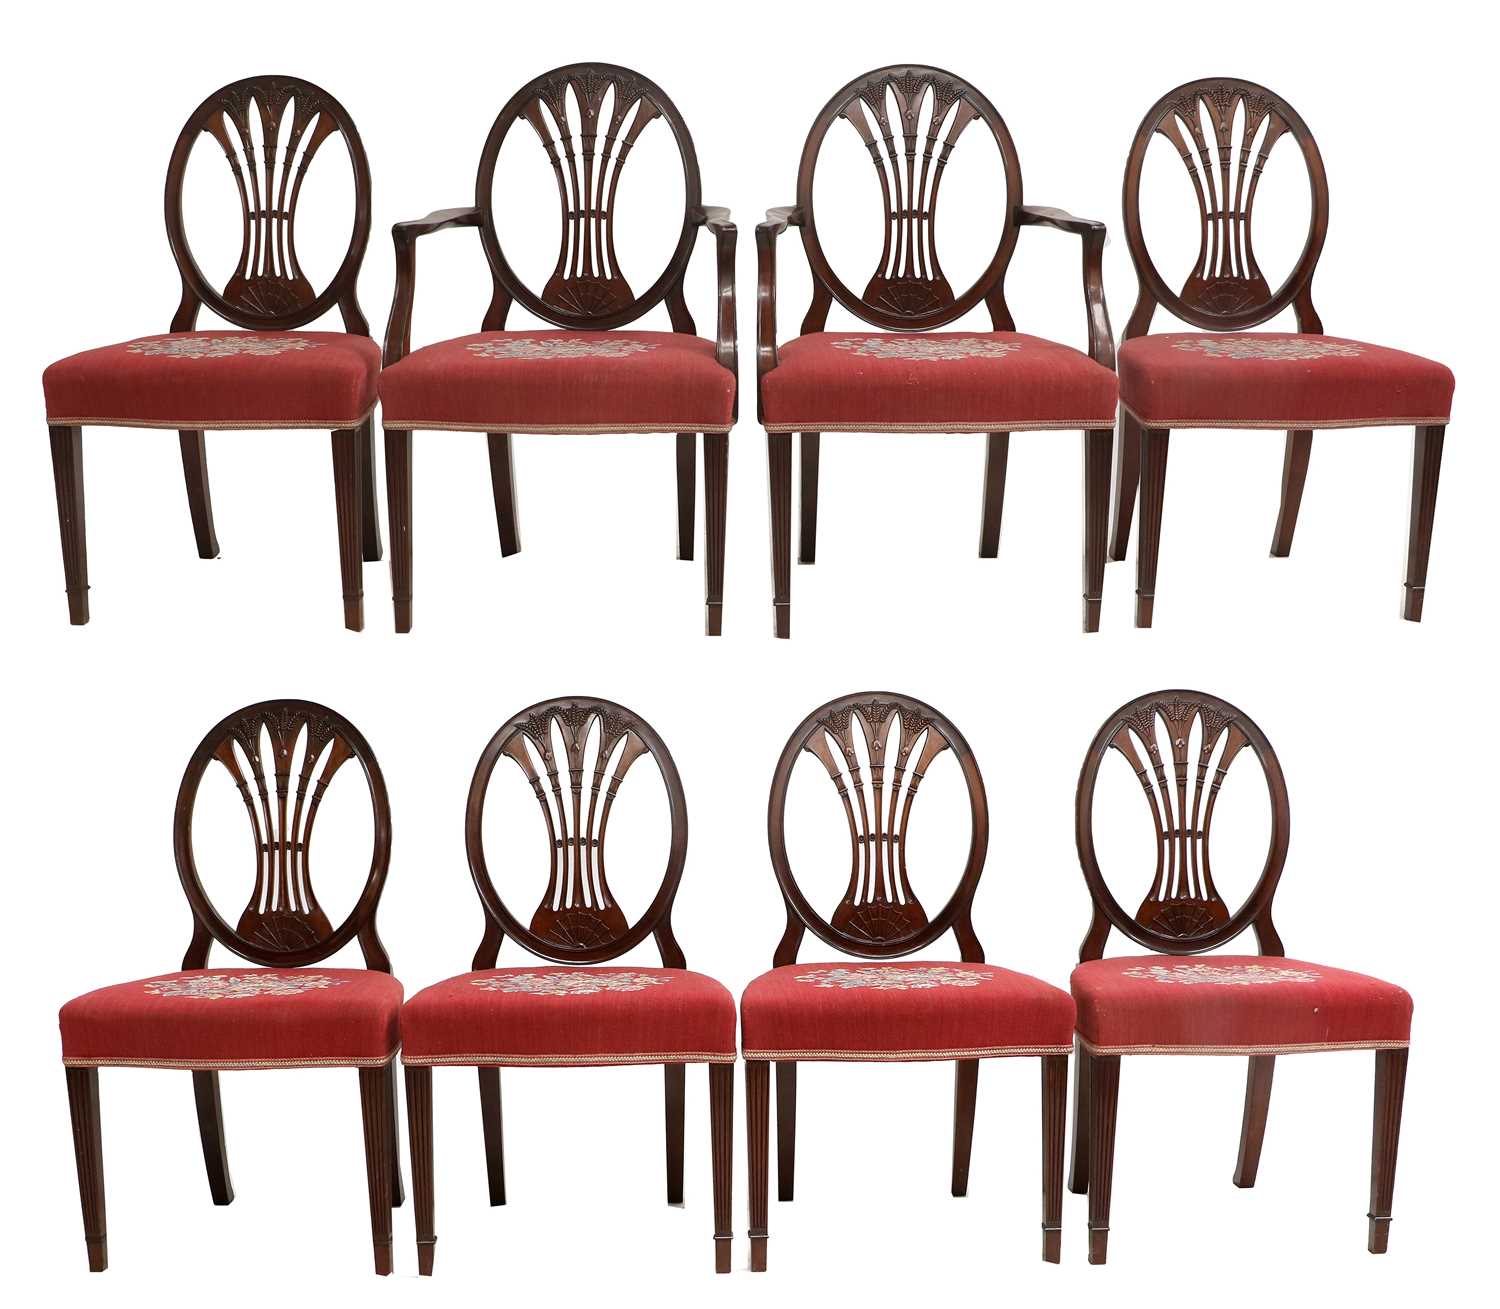 A Set of Eight (6+2) Carved Mahogany Hepplewhite-Style Dining Chairs, late 19th/early 20th